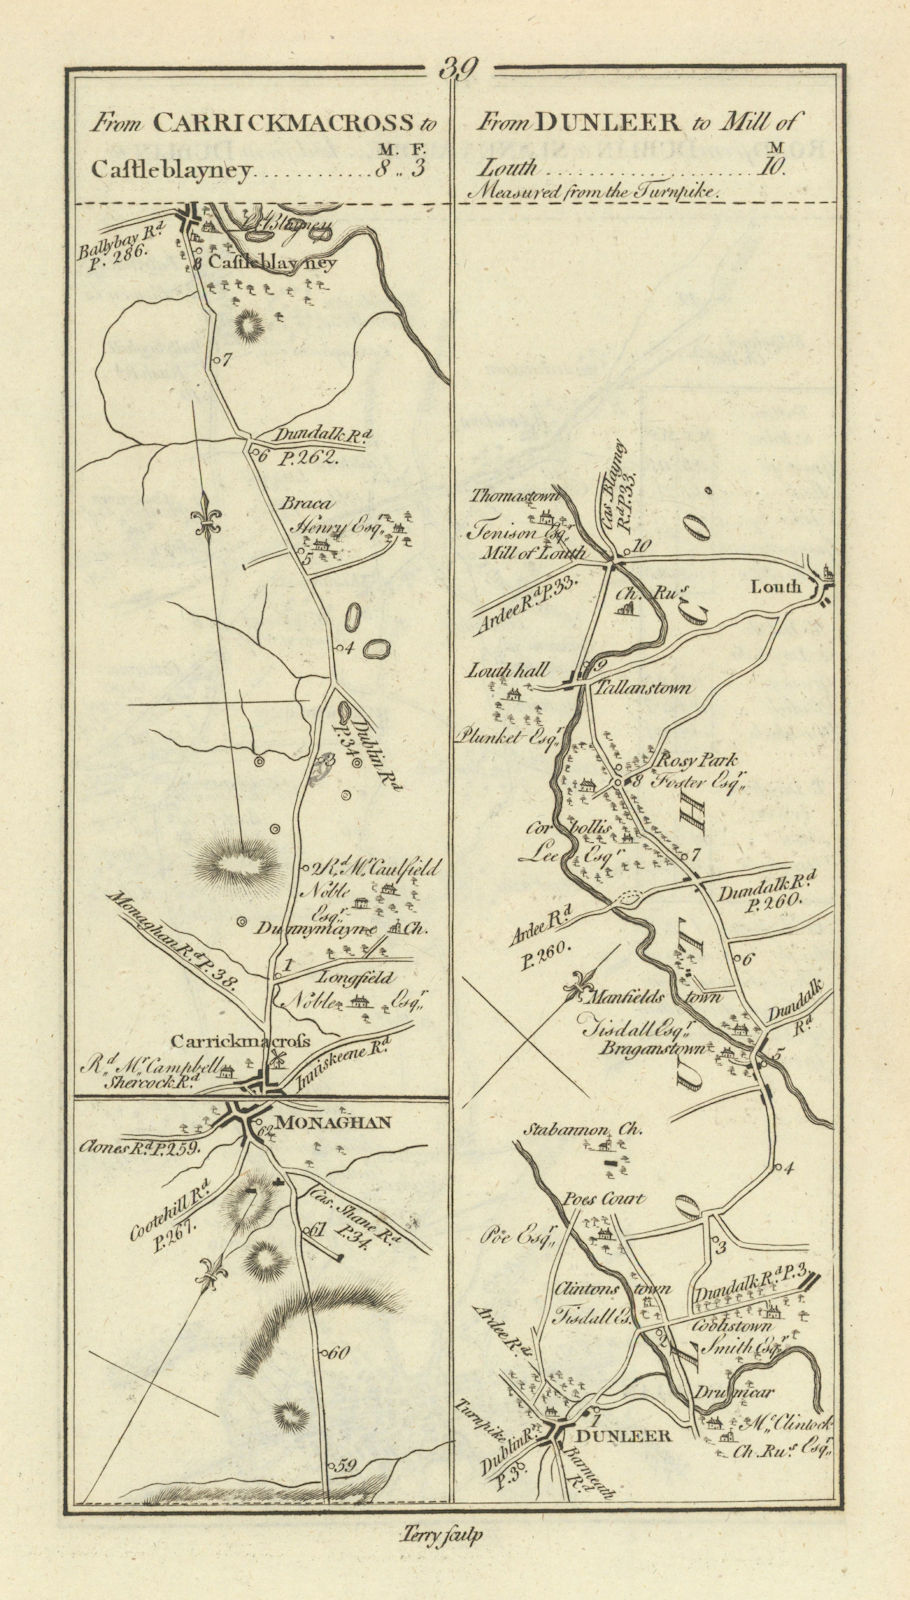 Associate Product #39 Carrickmacross to Castleblayney. Dunleer to Louth. TAYLOR/SKINNER 1778 map